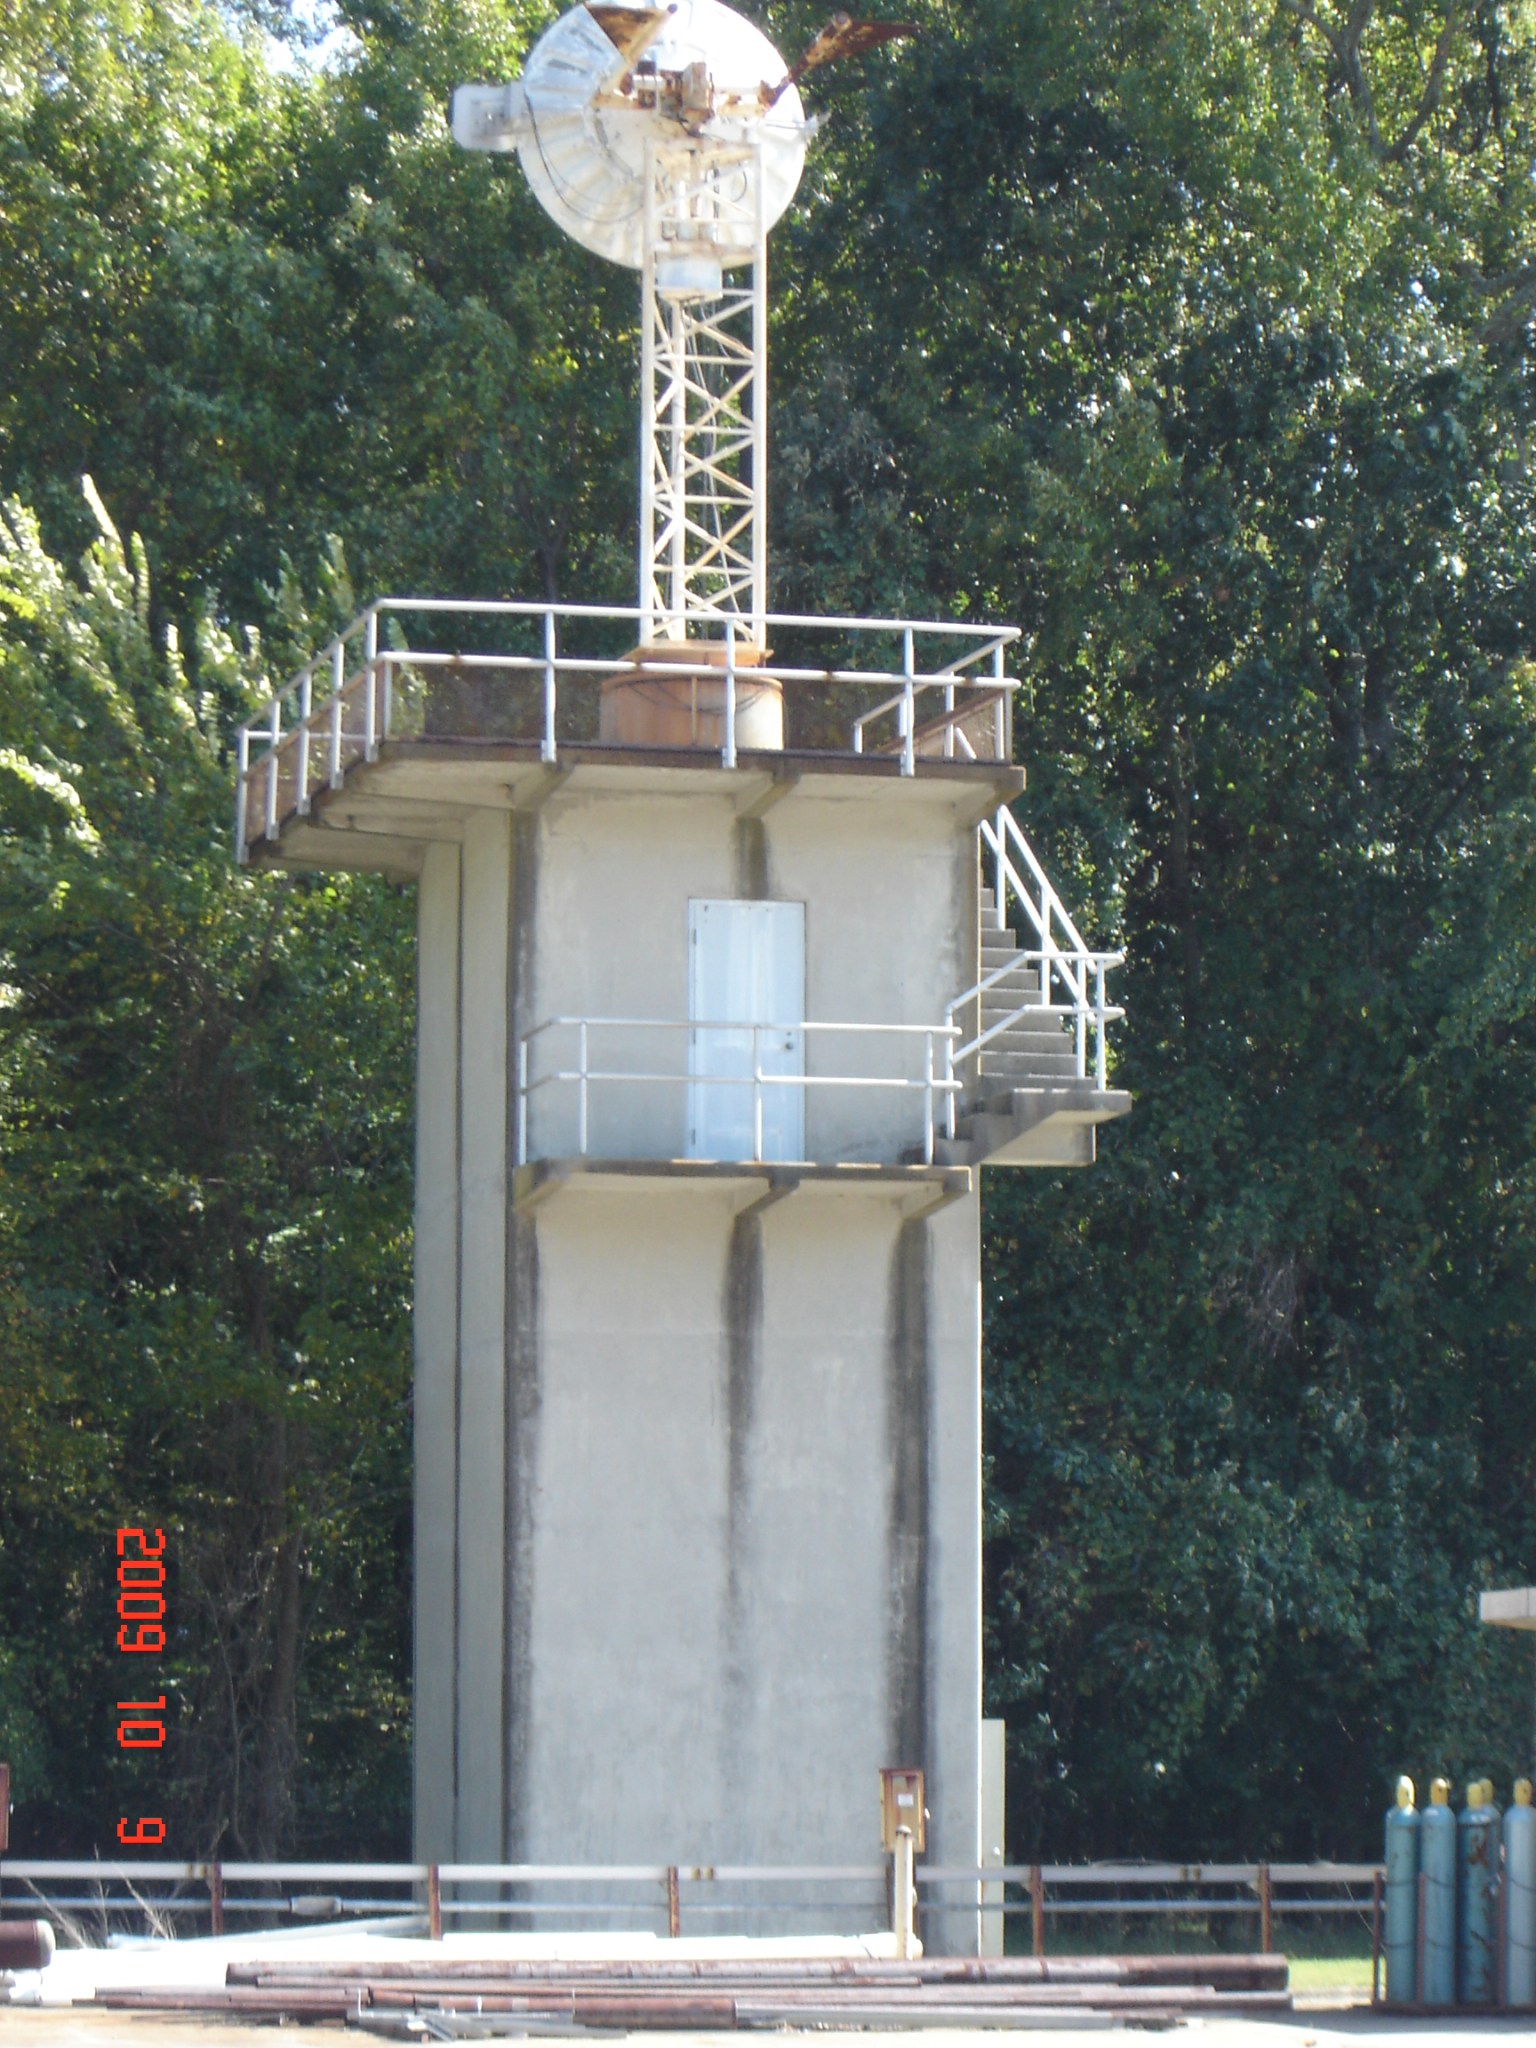 This is a photo of the exterior of the Microwave and VHF Communications Tower (Building 1299E) in 2009